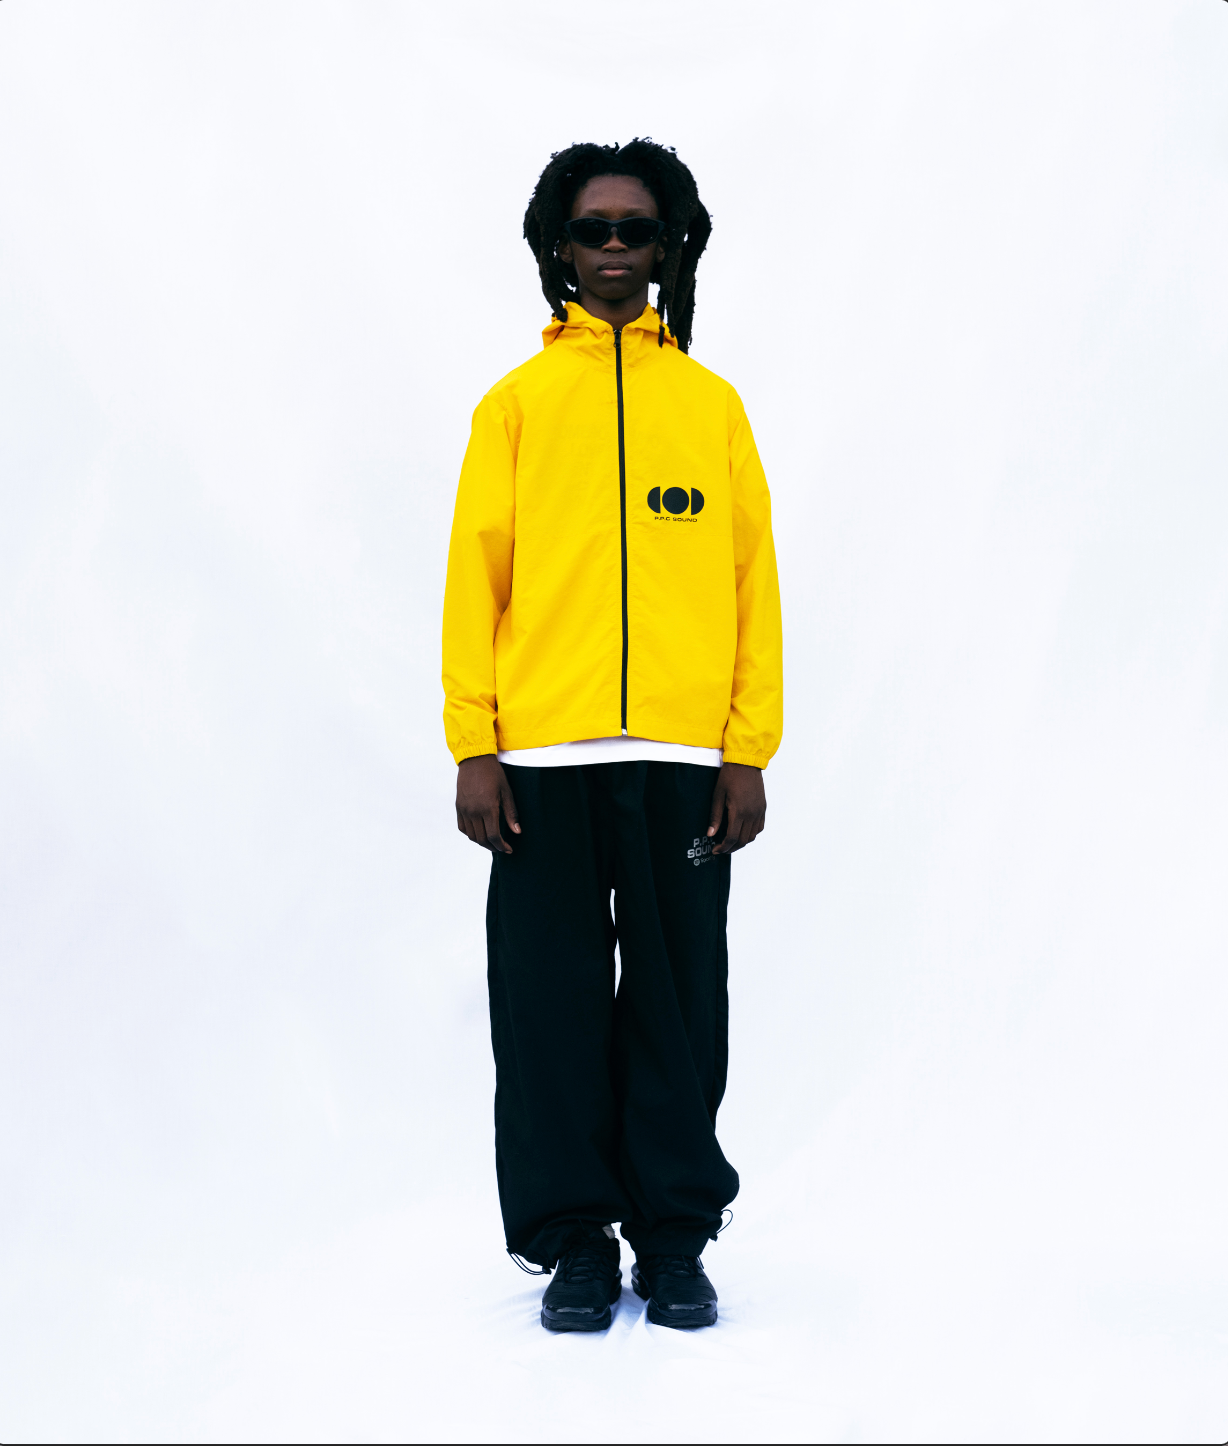 PPC SOUND powered by Spotify Wind Breaker - Yellow